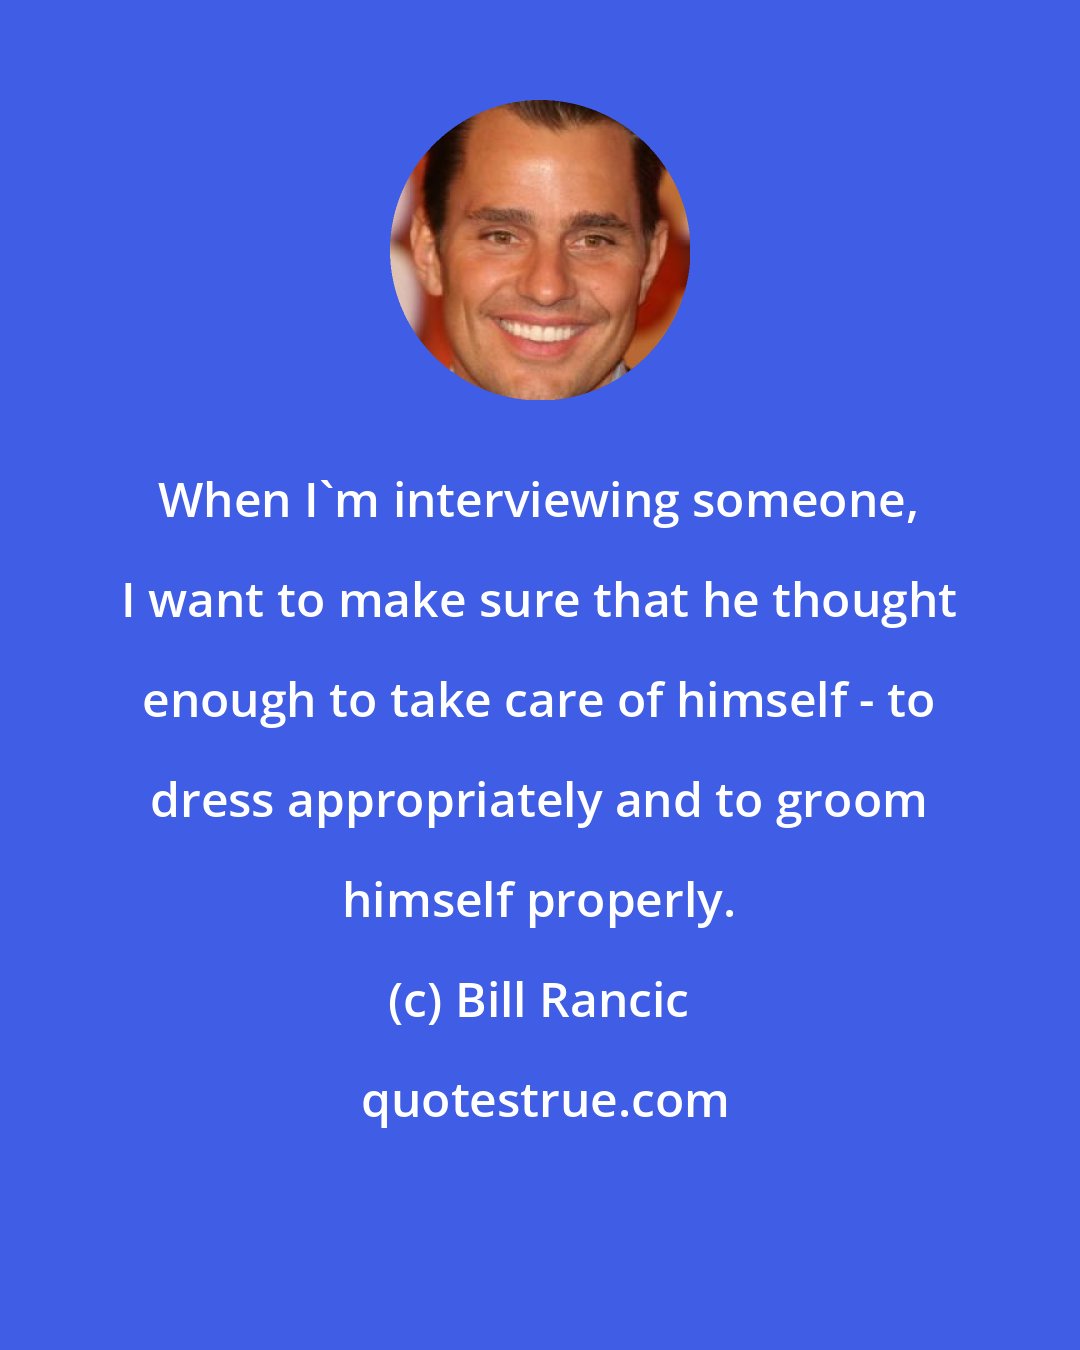 Bill Rancic: When I'm interviewing someone, I want to make sure that he thought enough to take care of himself - to dress appropriately and to groom himself properly.